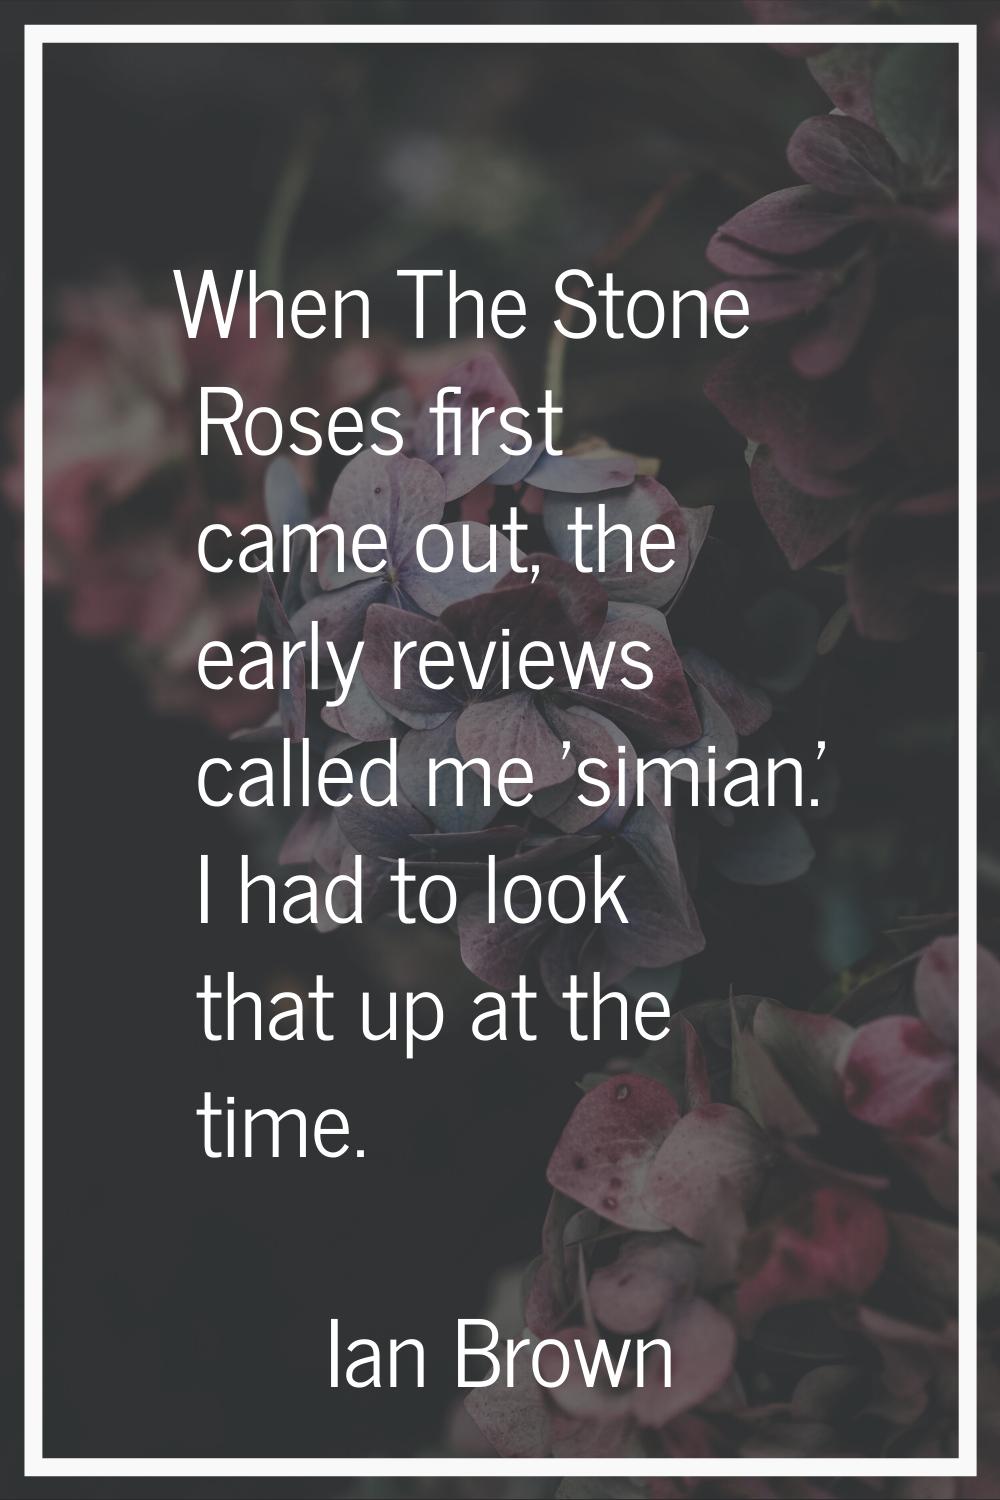 When The Stone Roses first came out, the early reviews called me 'simian.' I had to look that up at